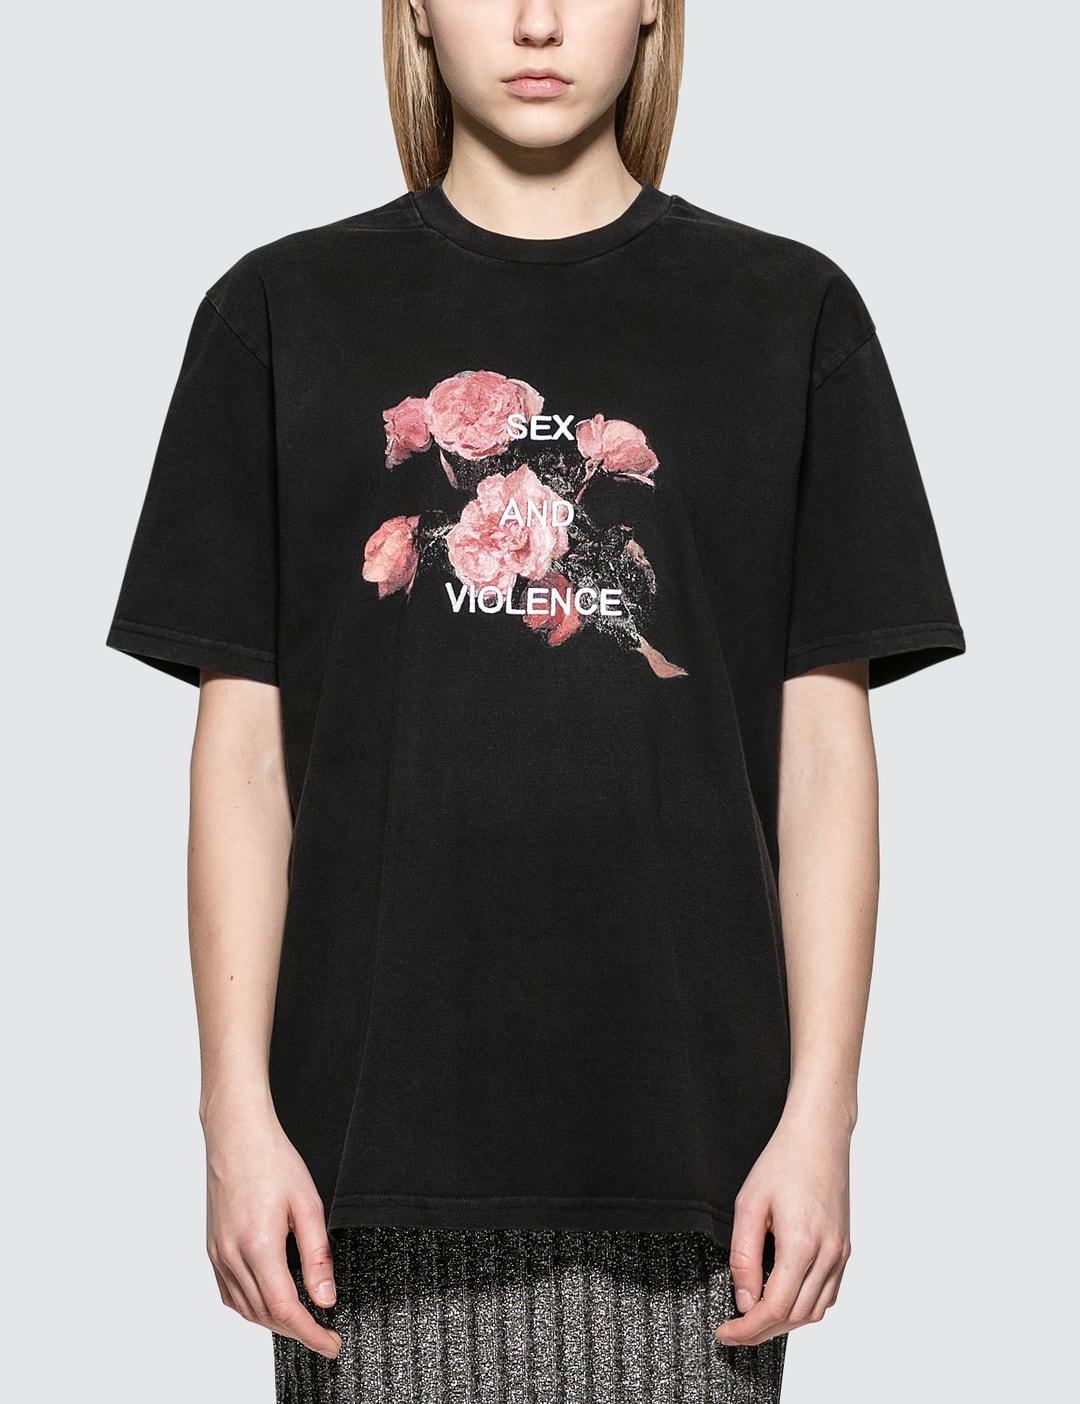 Misbhv - Sex & Violence S/S T-Shirt | HBX - Globally Curated Fashion ...